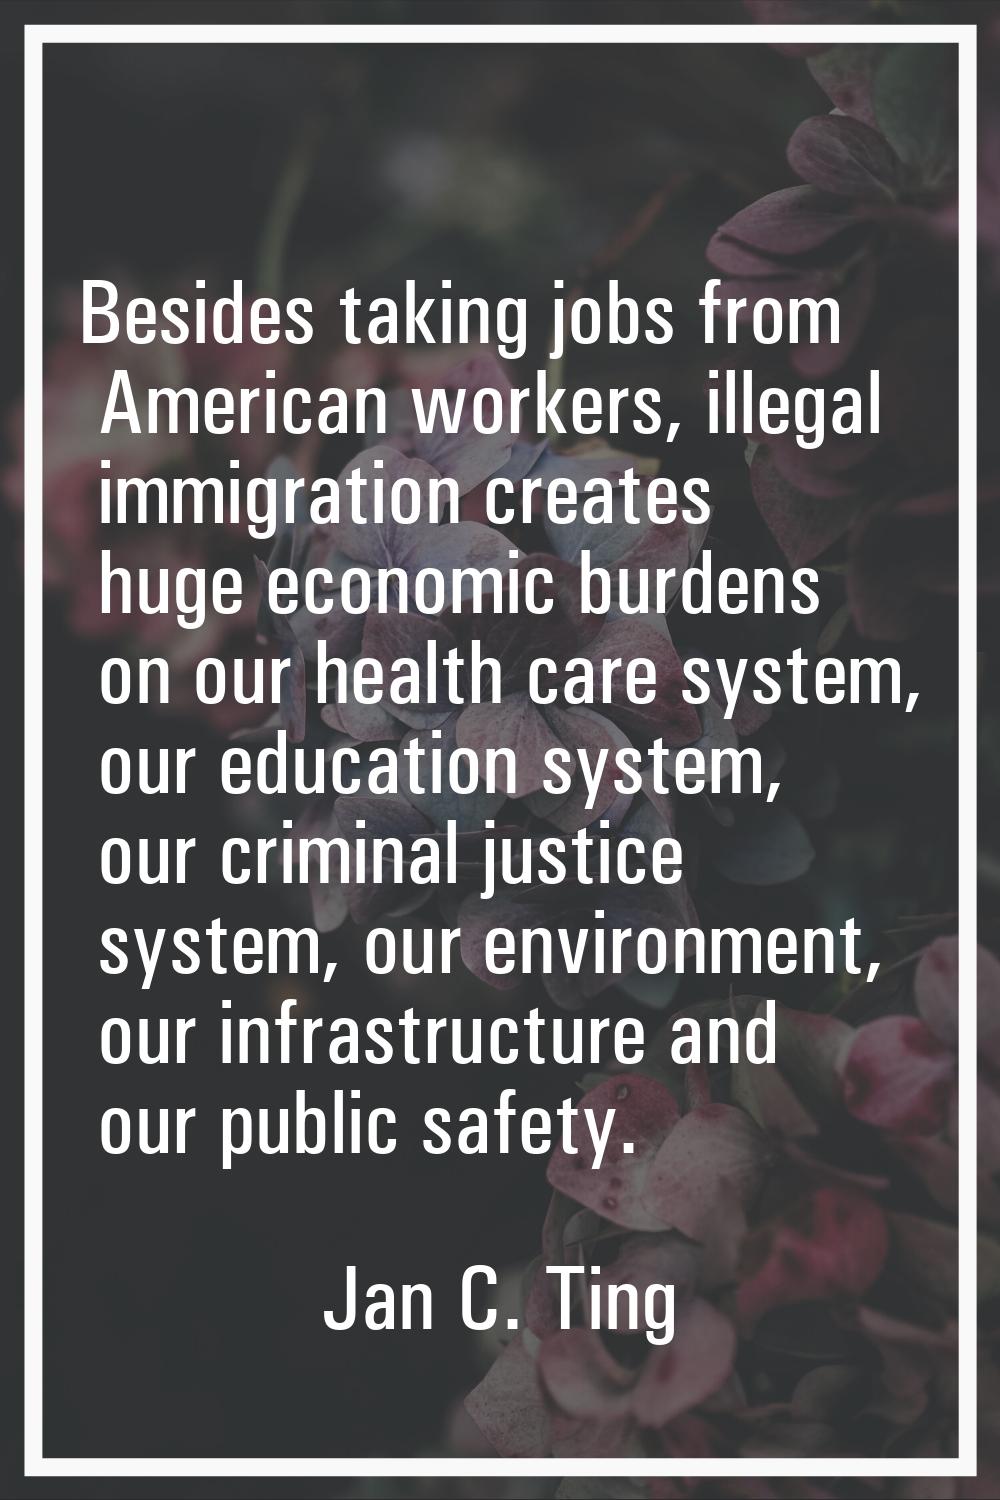 Besides taking jobs from American workers, illegal immigration creates huge economic burdens on our